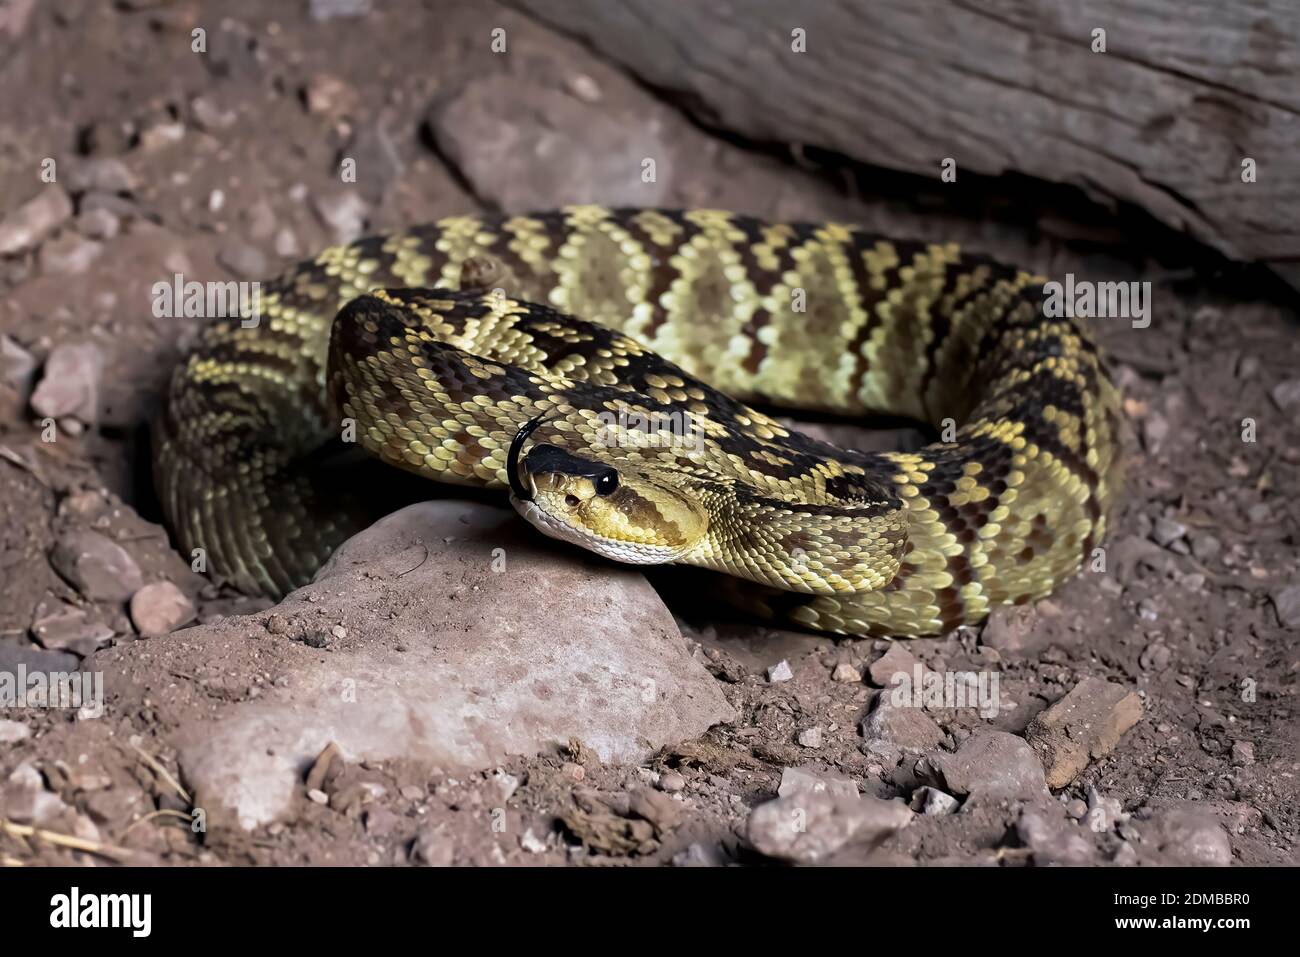 Coiled rattlesnake sitting in the dirt with tongue extended in closeup profile low angle image. Stock Photo